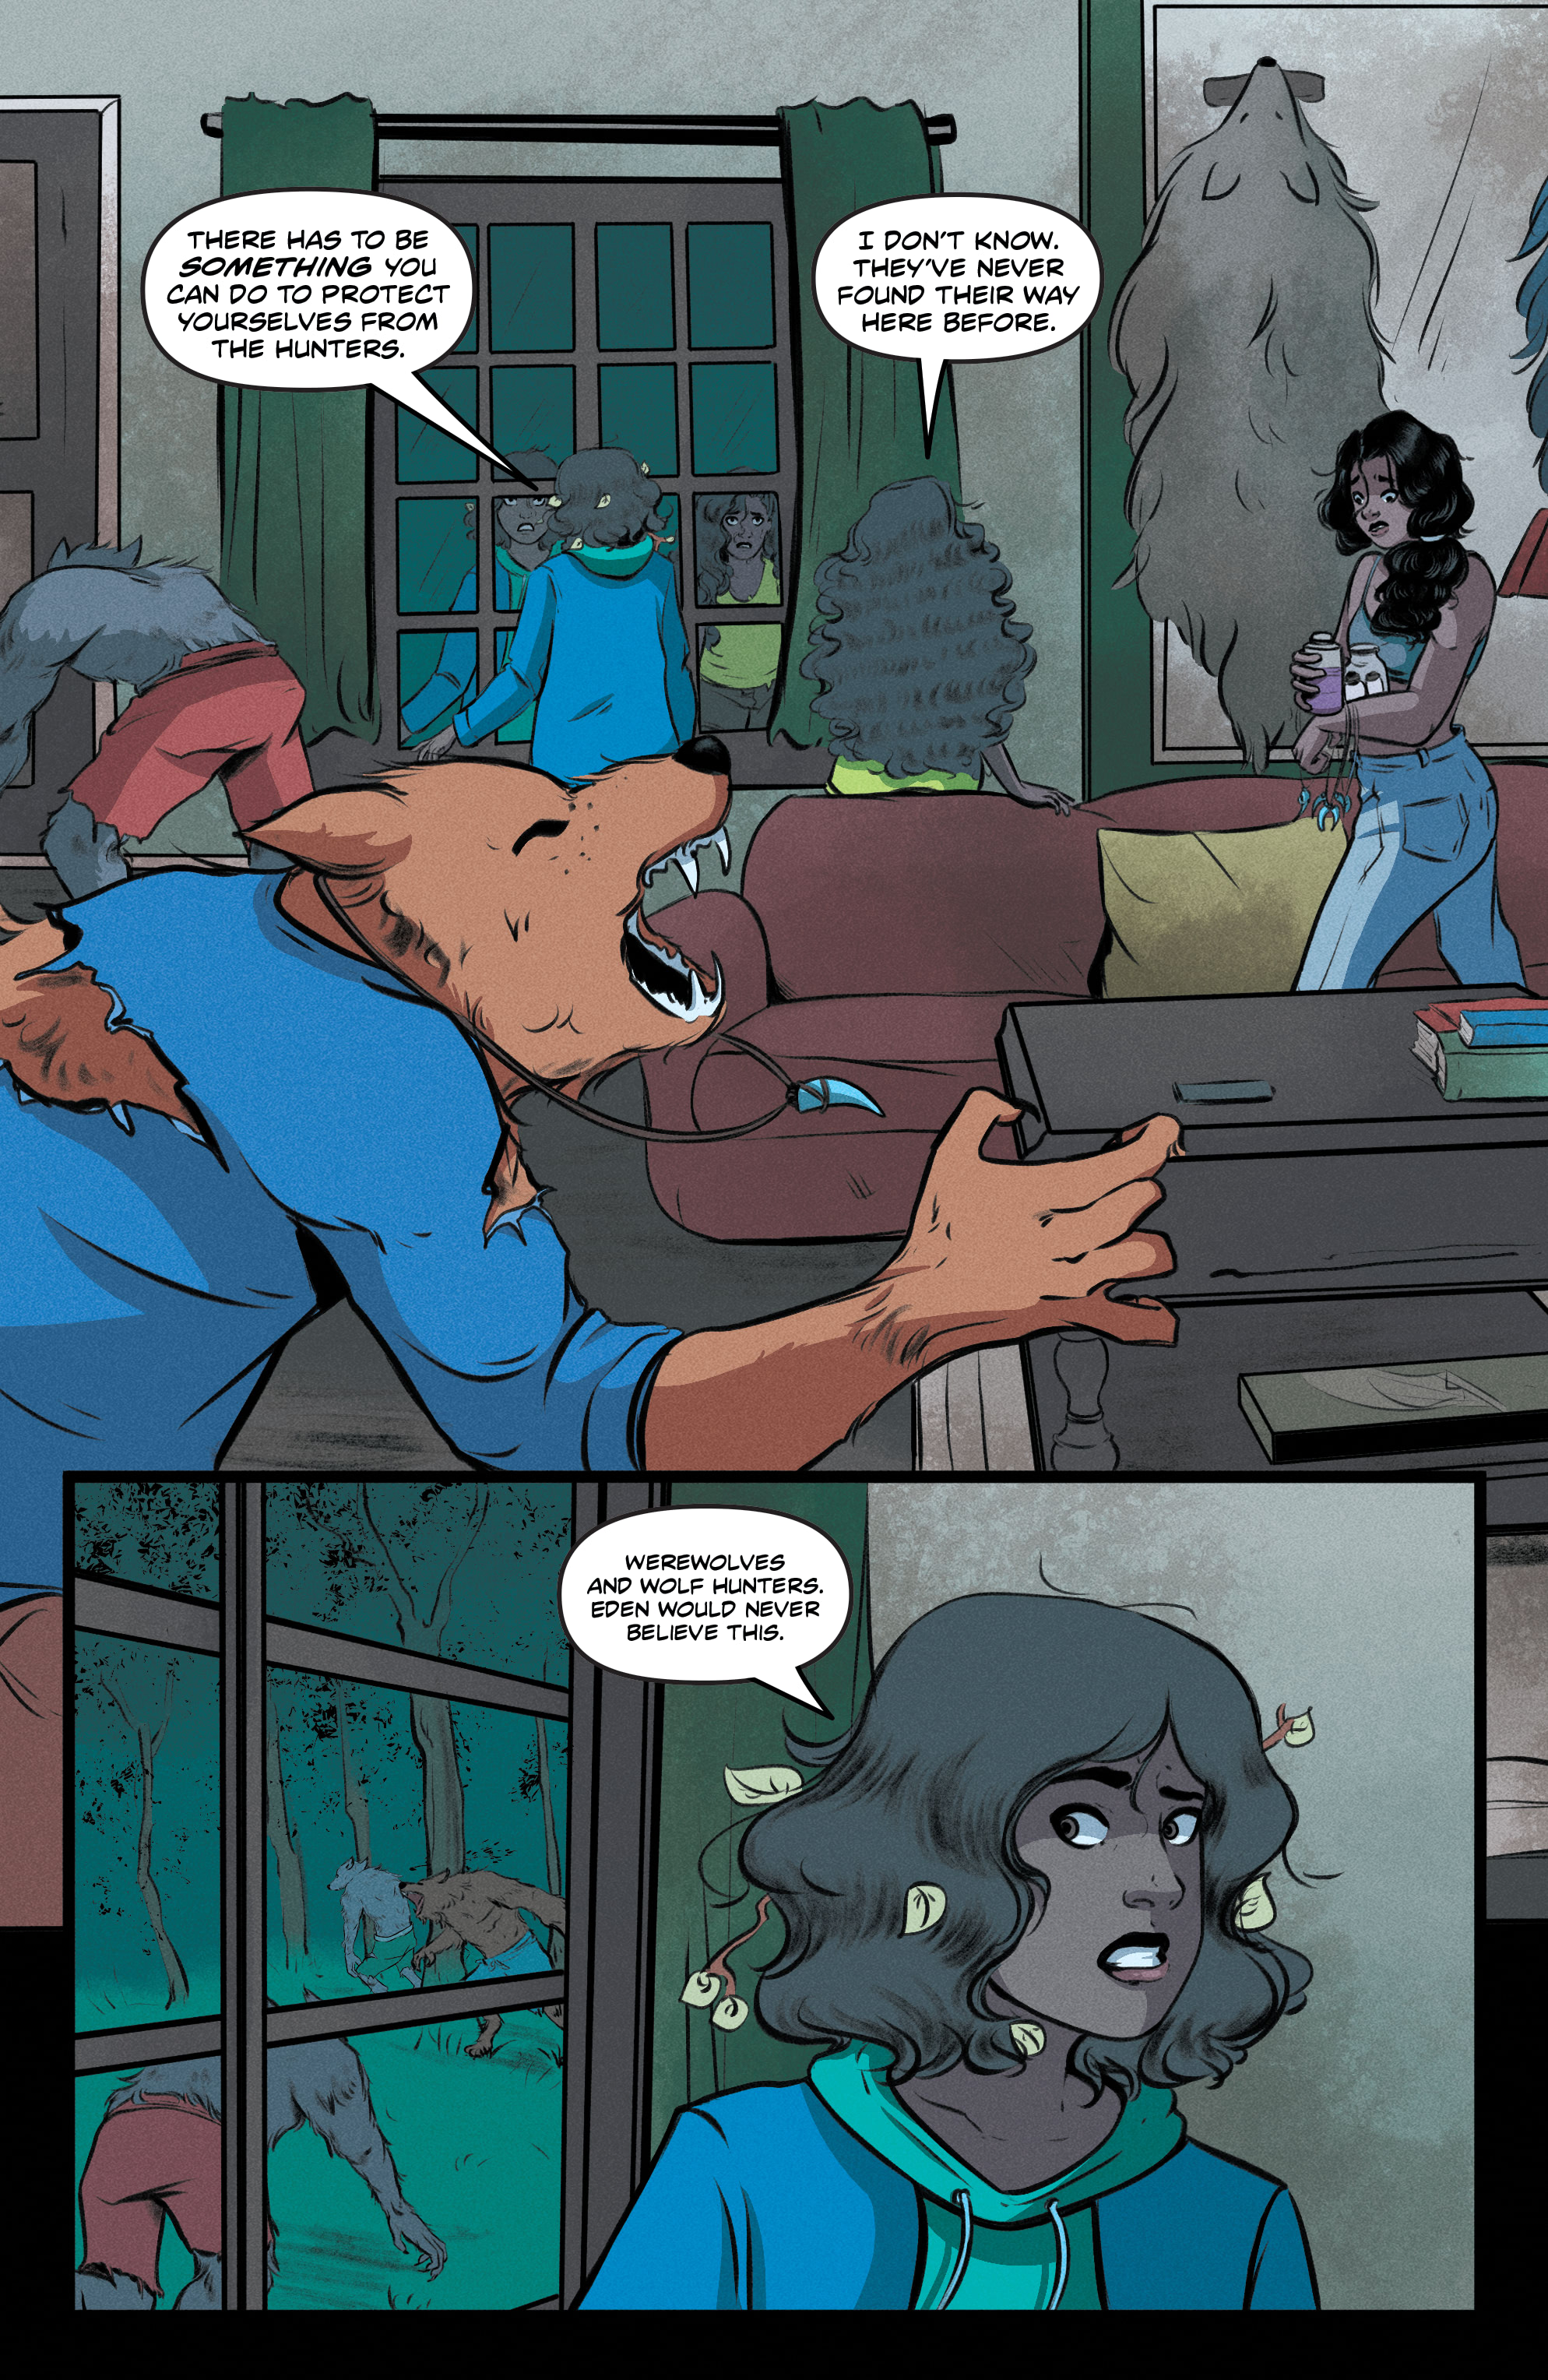 Goosebumps: Secrets of the Swamp (2020-): Chapter 4 - Page 3